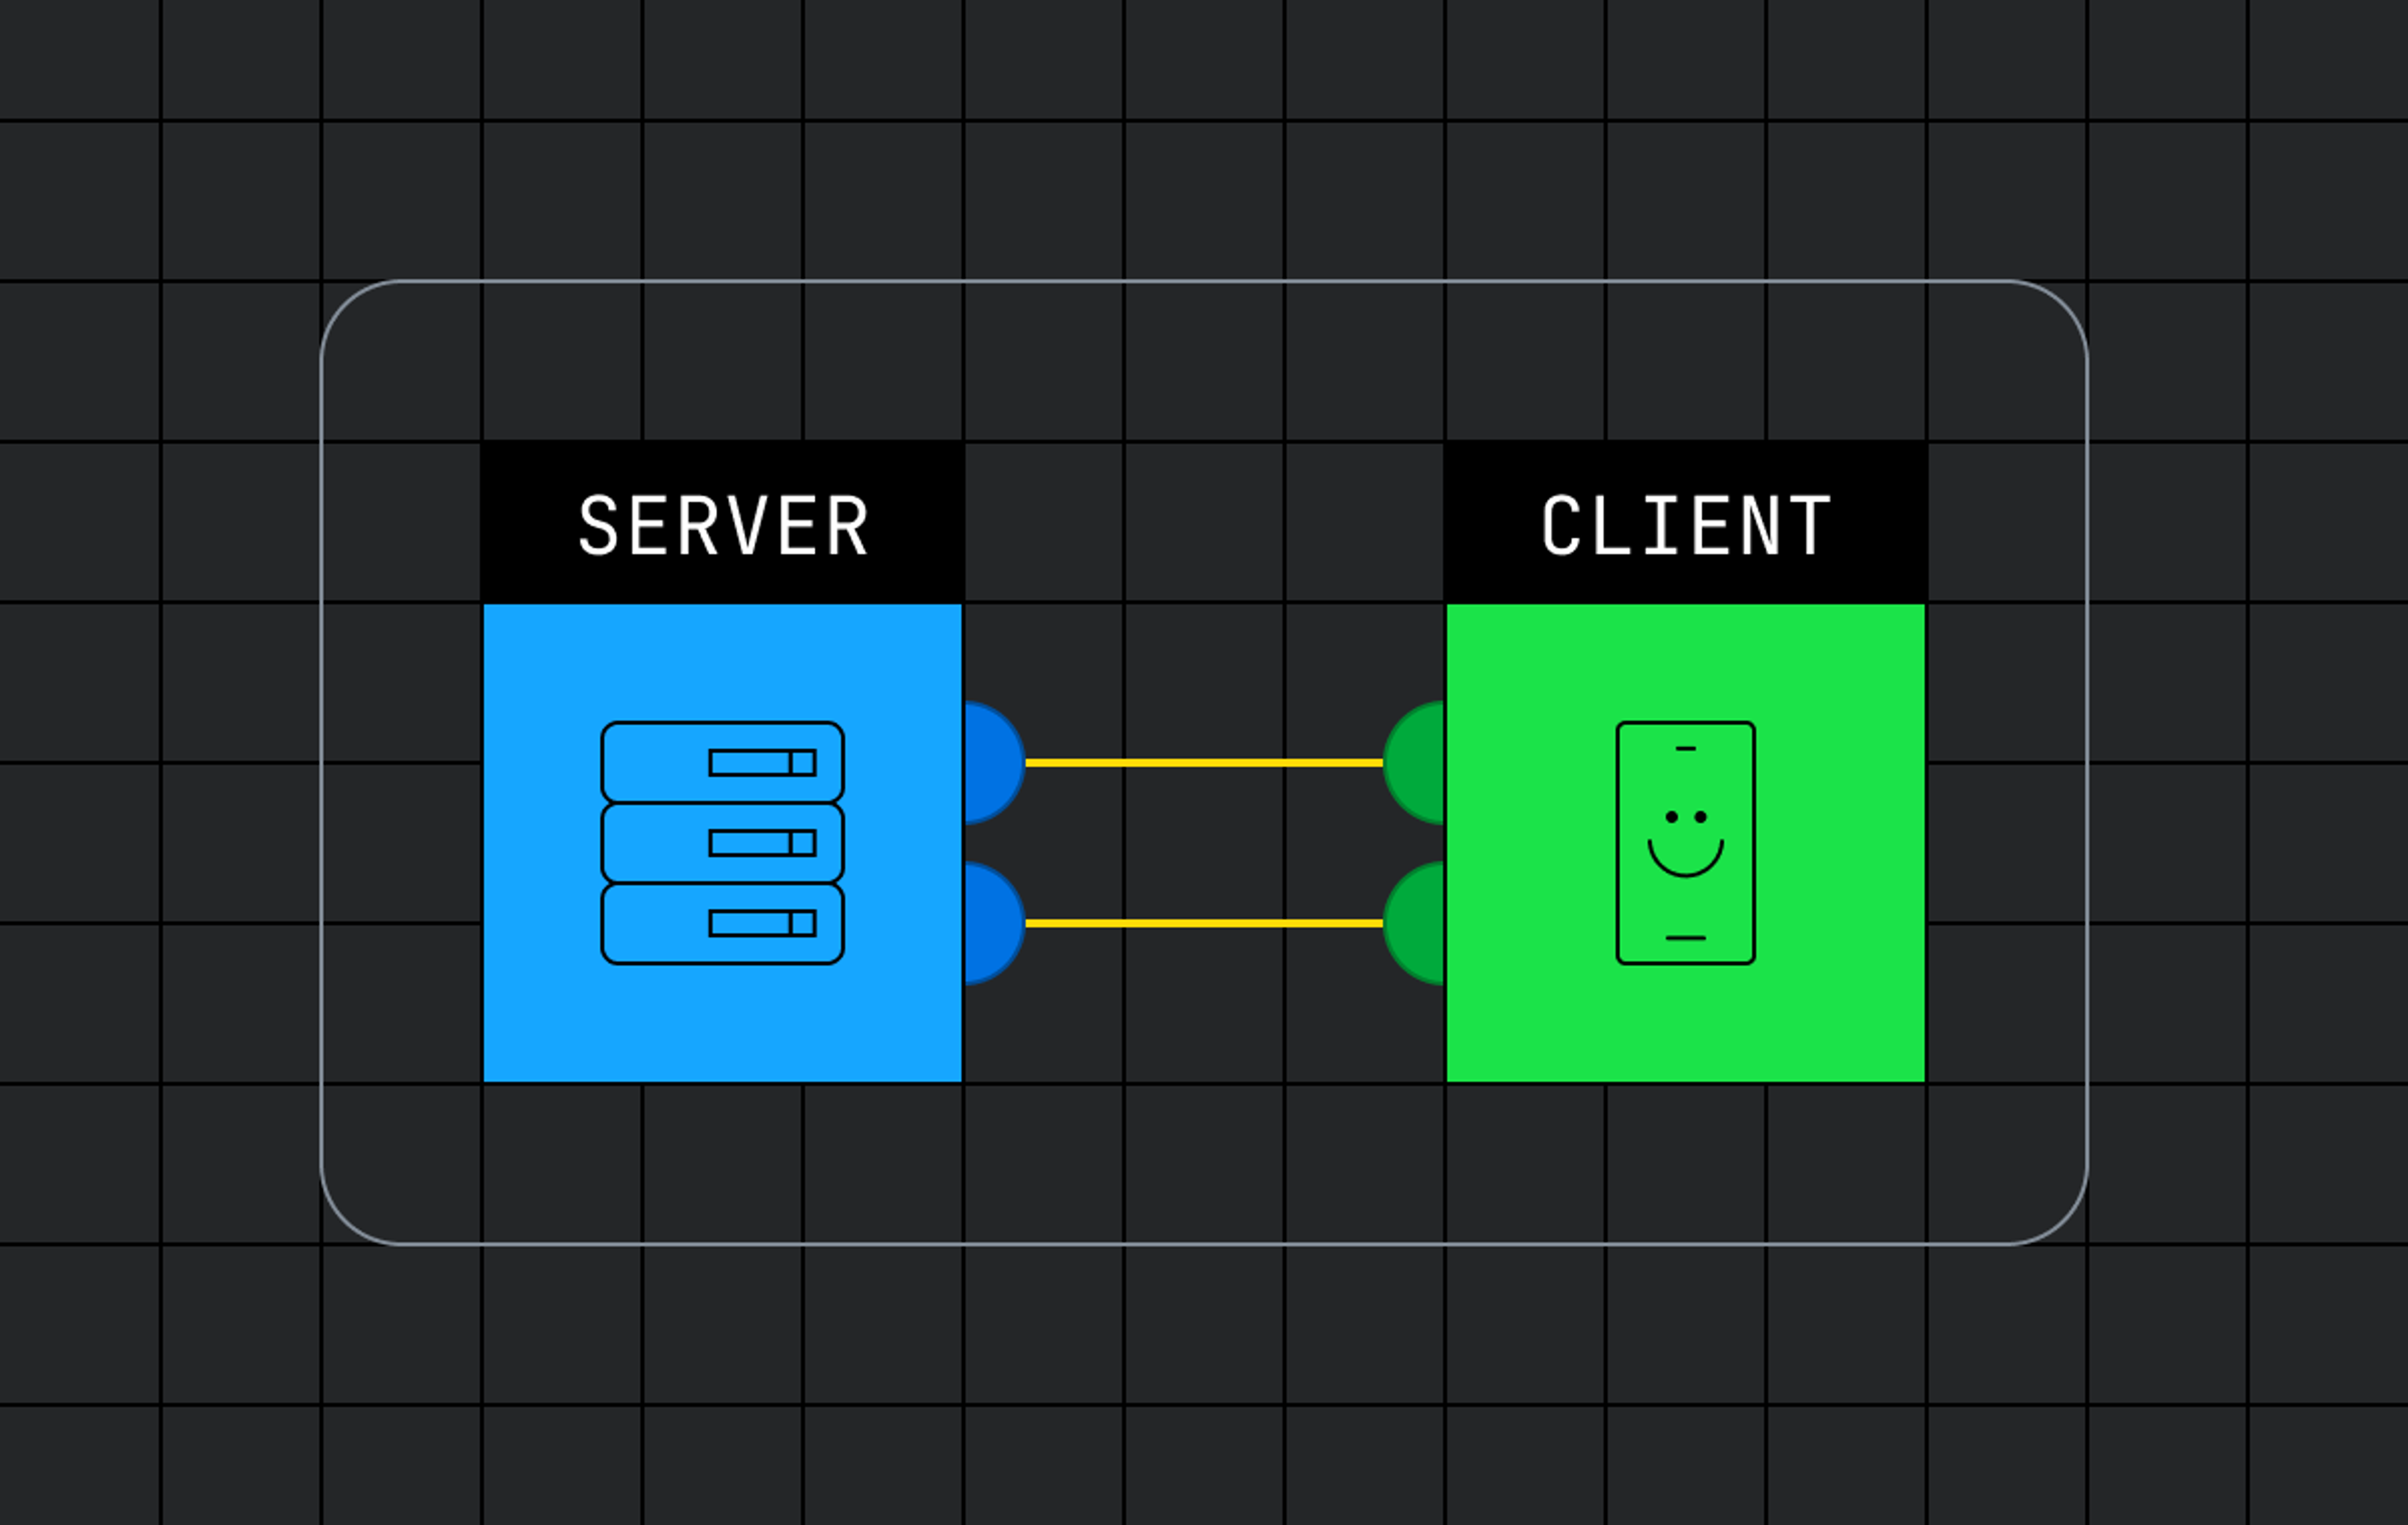 Two boxes, one labeled server and the other labeled client, are closely connected by two lines.